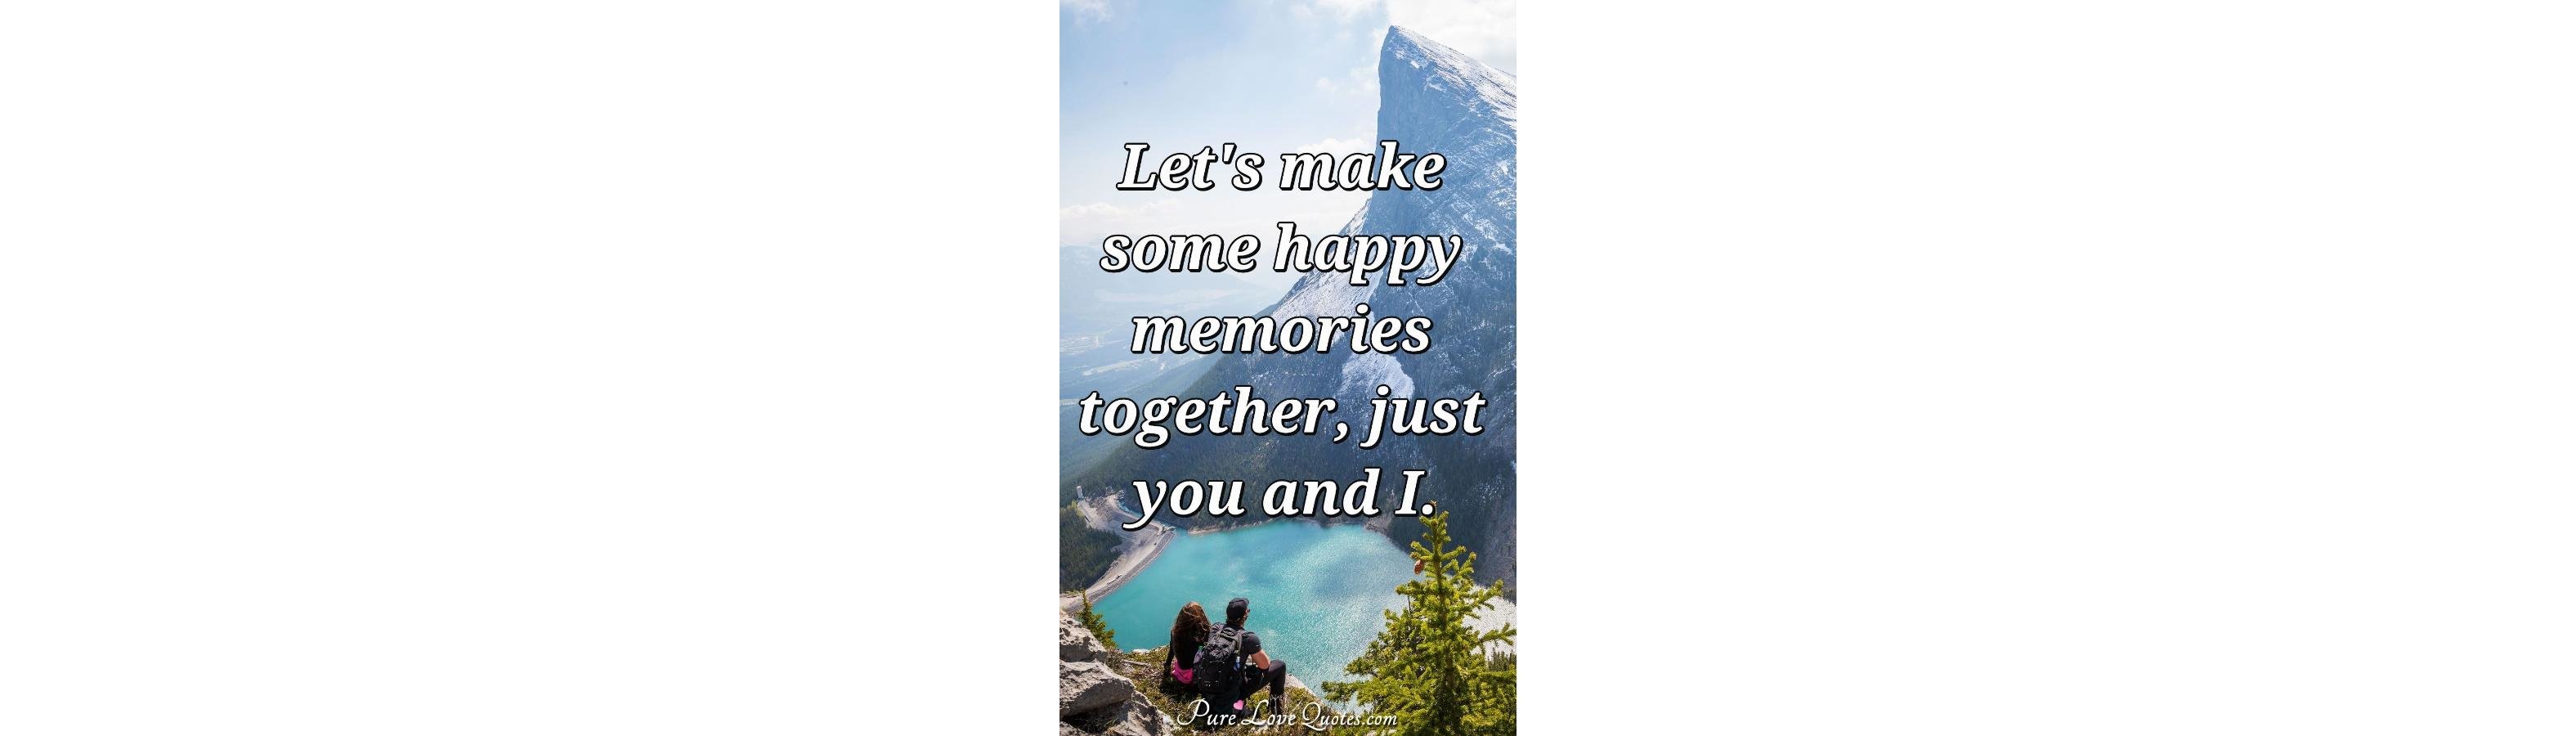 Let's make some happy memories together, just you and I